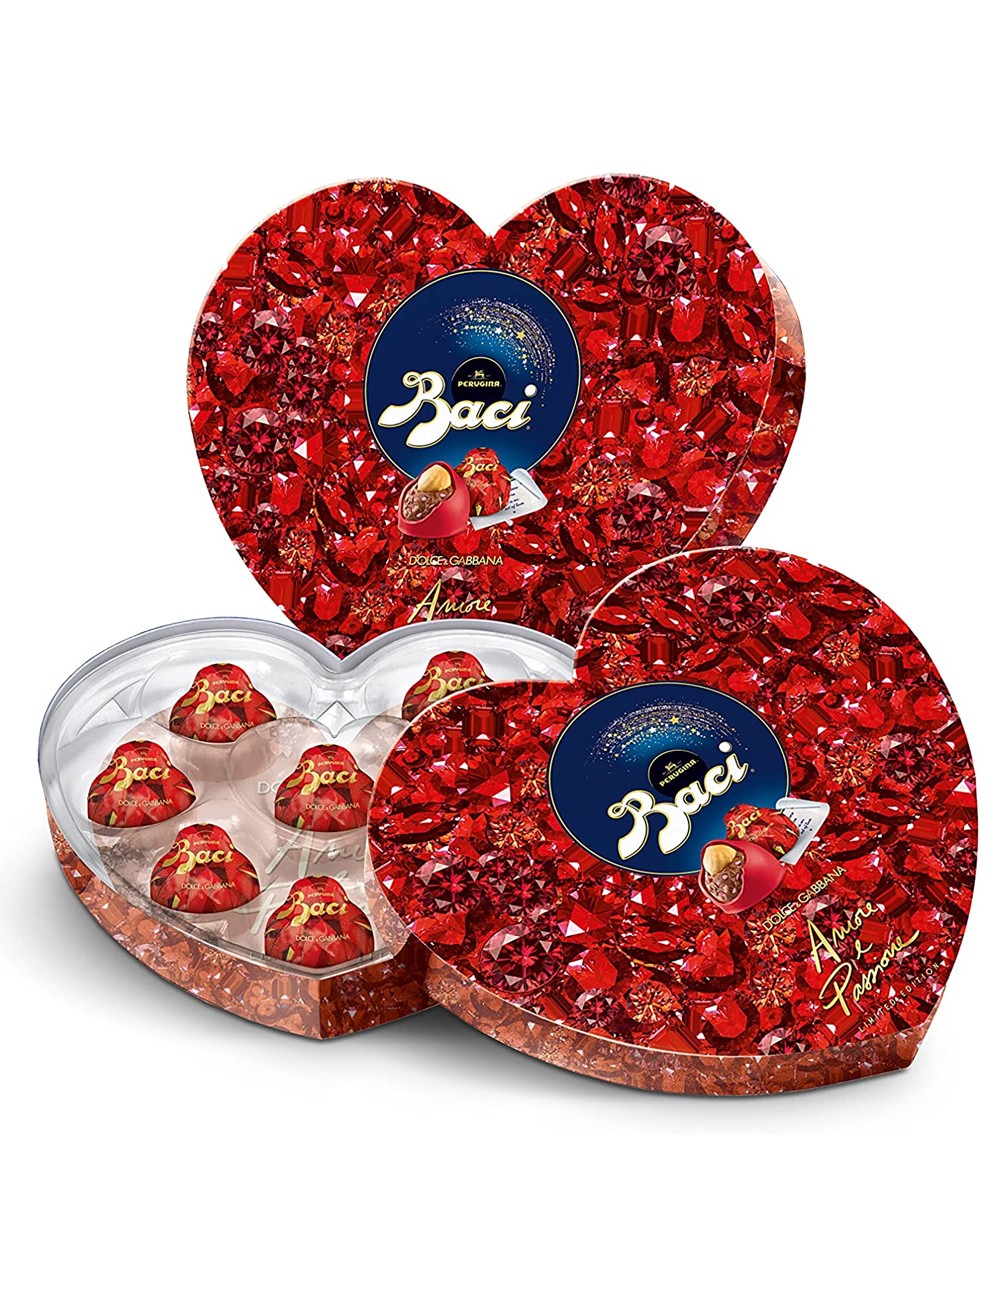 Baci Perugina Love and Passion Dolce and Gabbana Heart red Valentine's Day 100 g